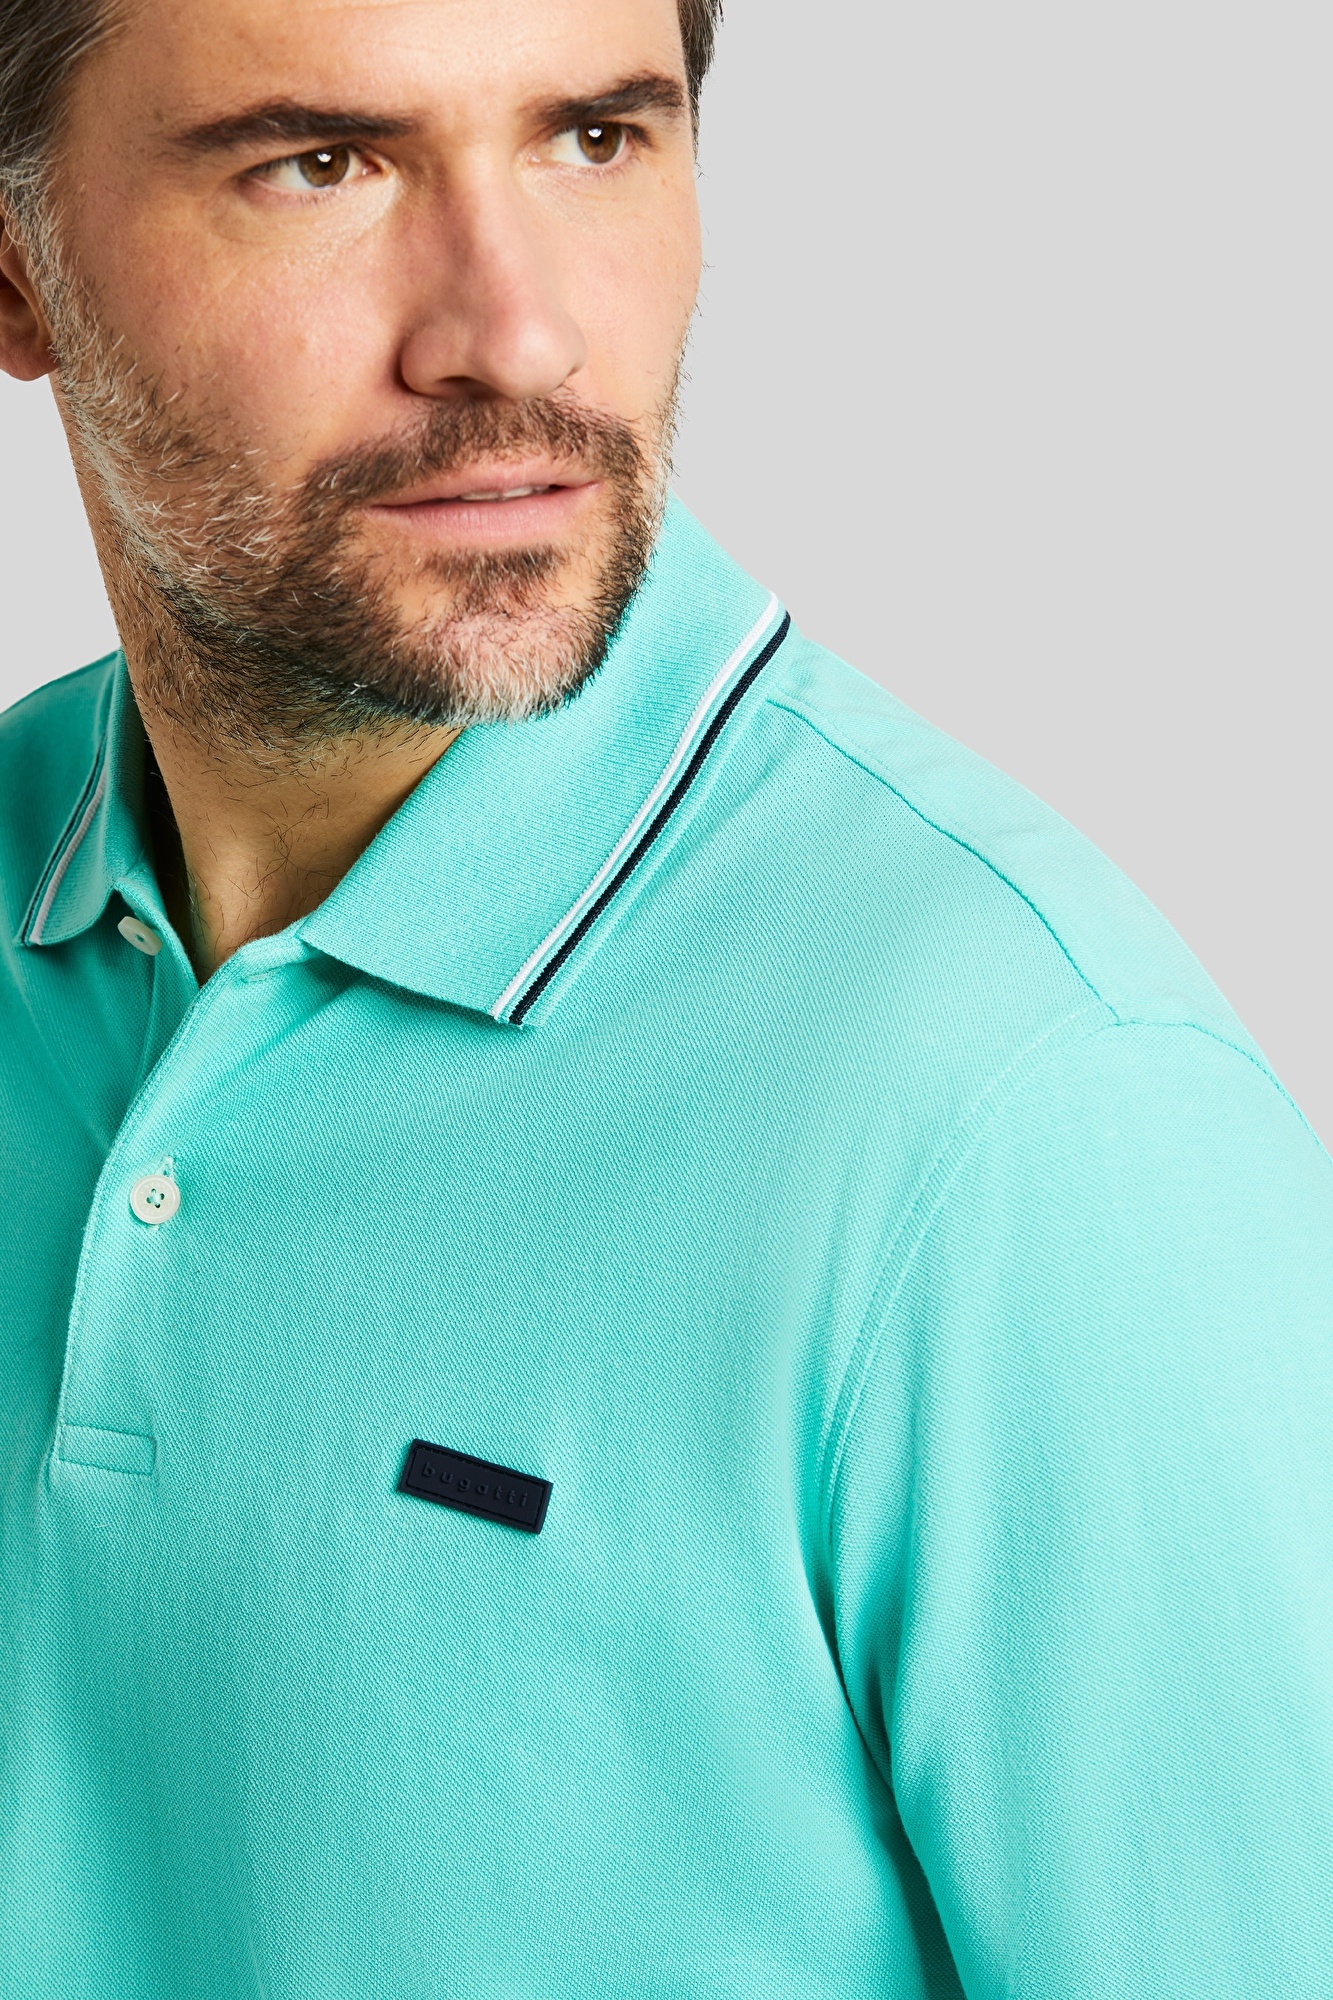 Pique polo shirt in with the stripes cuffs mint collar contrasting bugatti | on sleeve and